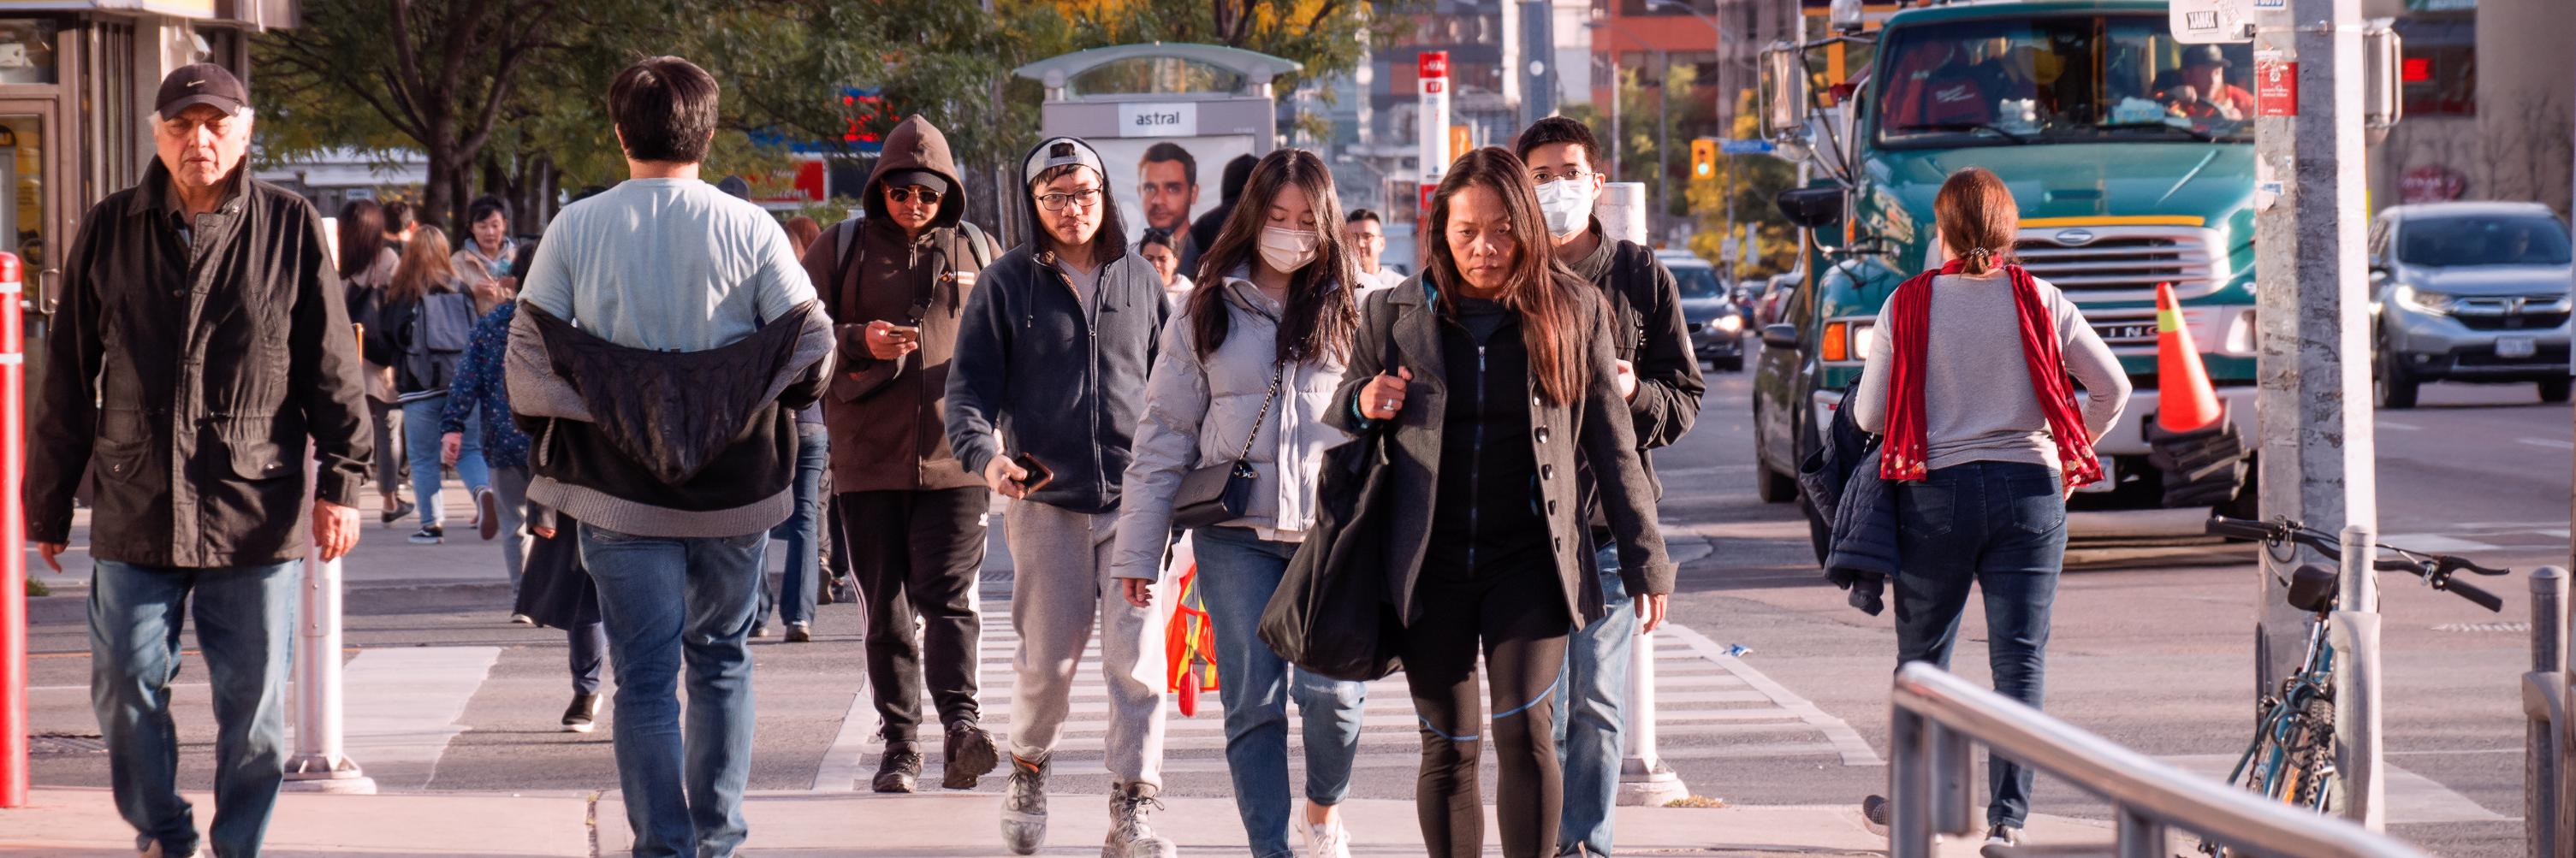 A crowd of people walking in Toronto, early evening, fall 2022